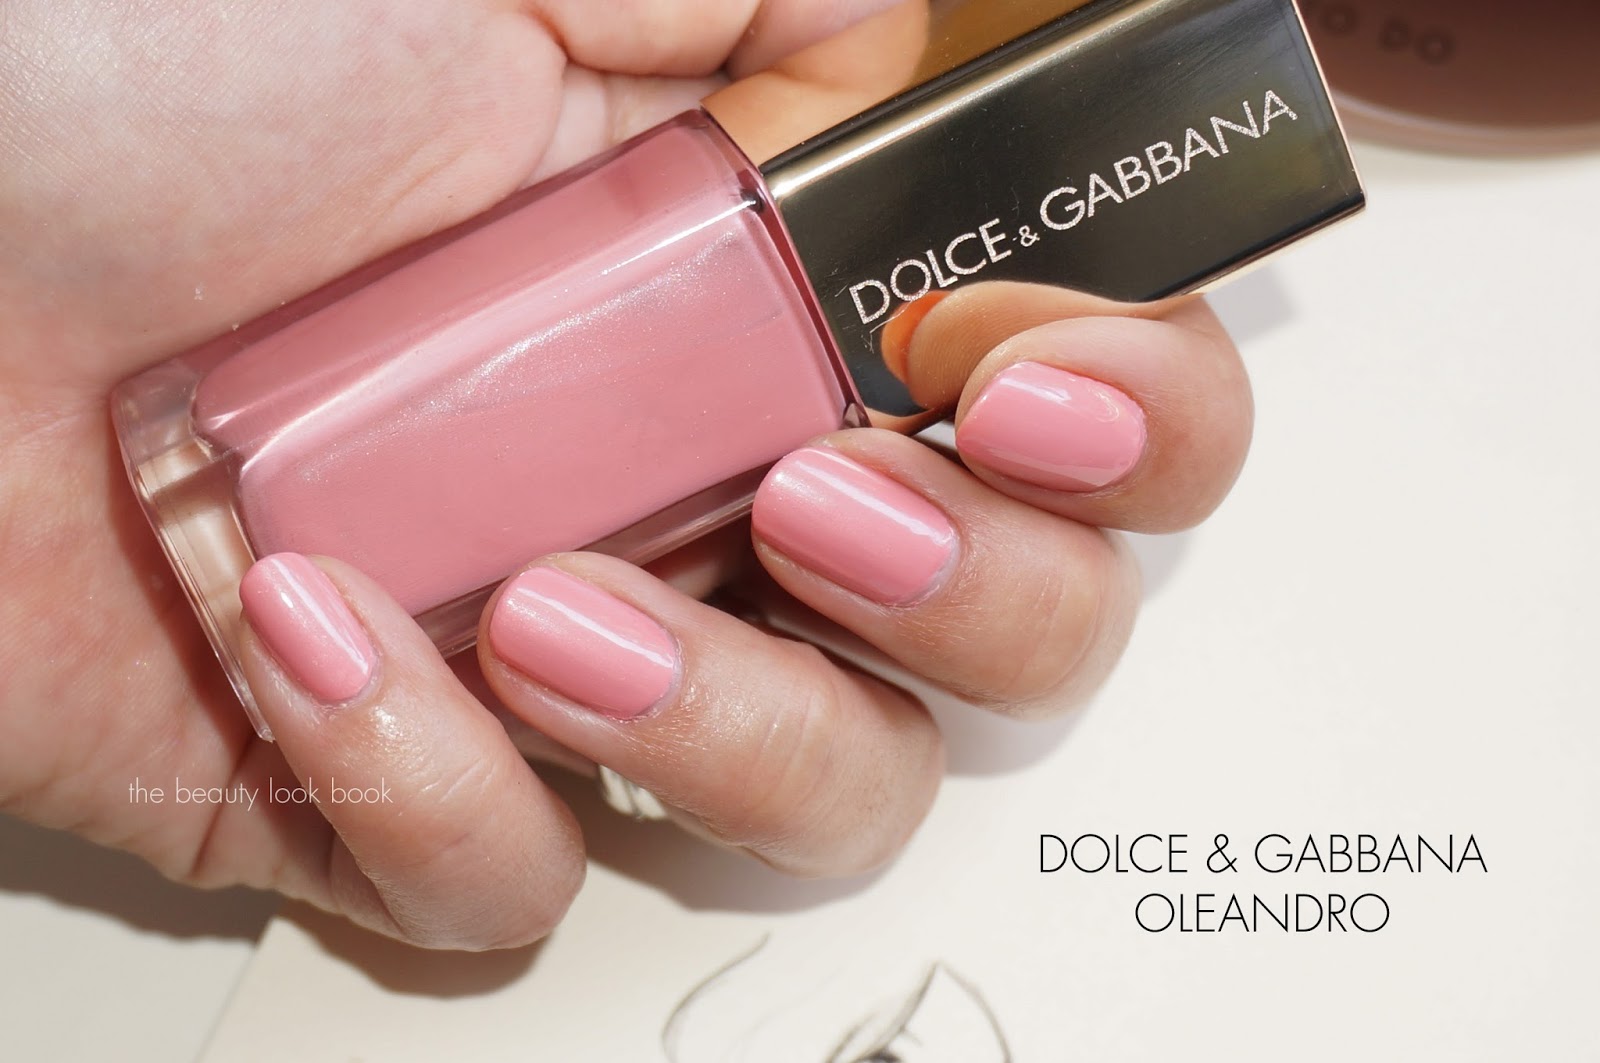 Dolce & Gabbana Oleandro Nail Lacquer - The Beauty Look Book